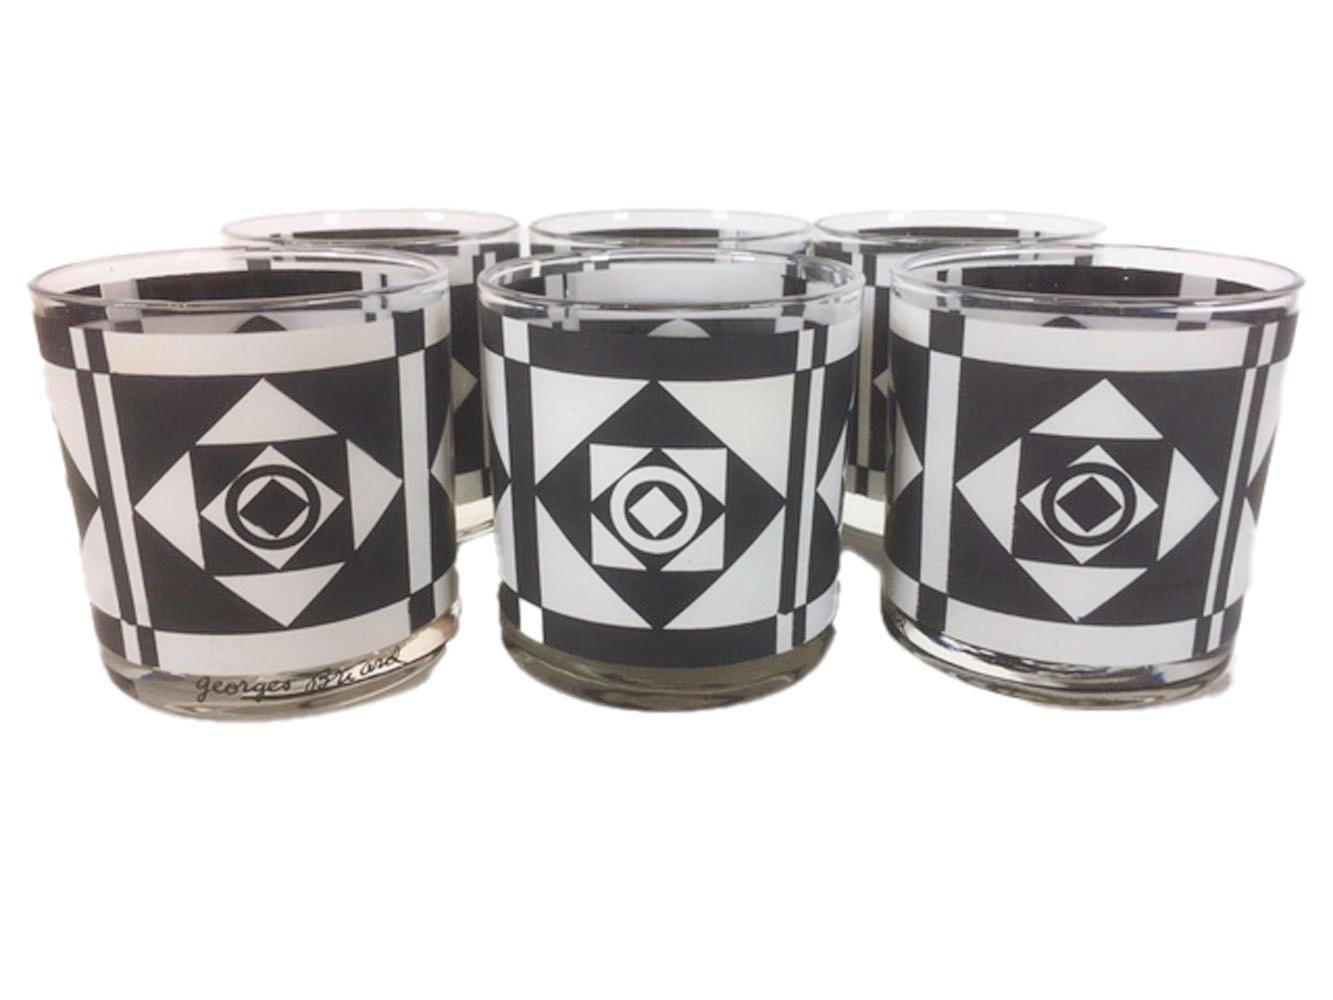 Vintage fourteen-piece set of Georges Briard barware in one of the late 1960s Op-Art patterns with an arrangement of black and white triangles, squares and circles creating an optical effect. 

8 - Highball: 5-1/2